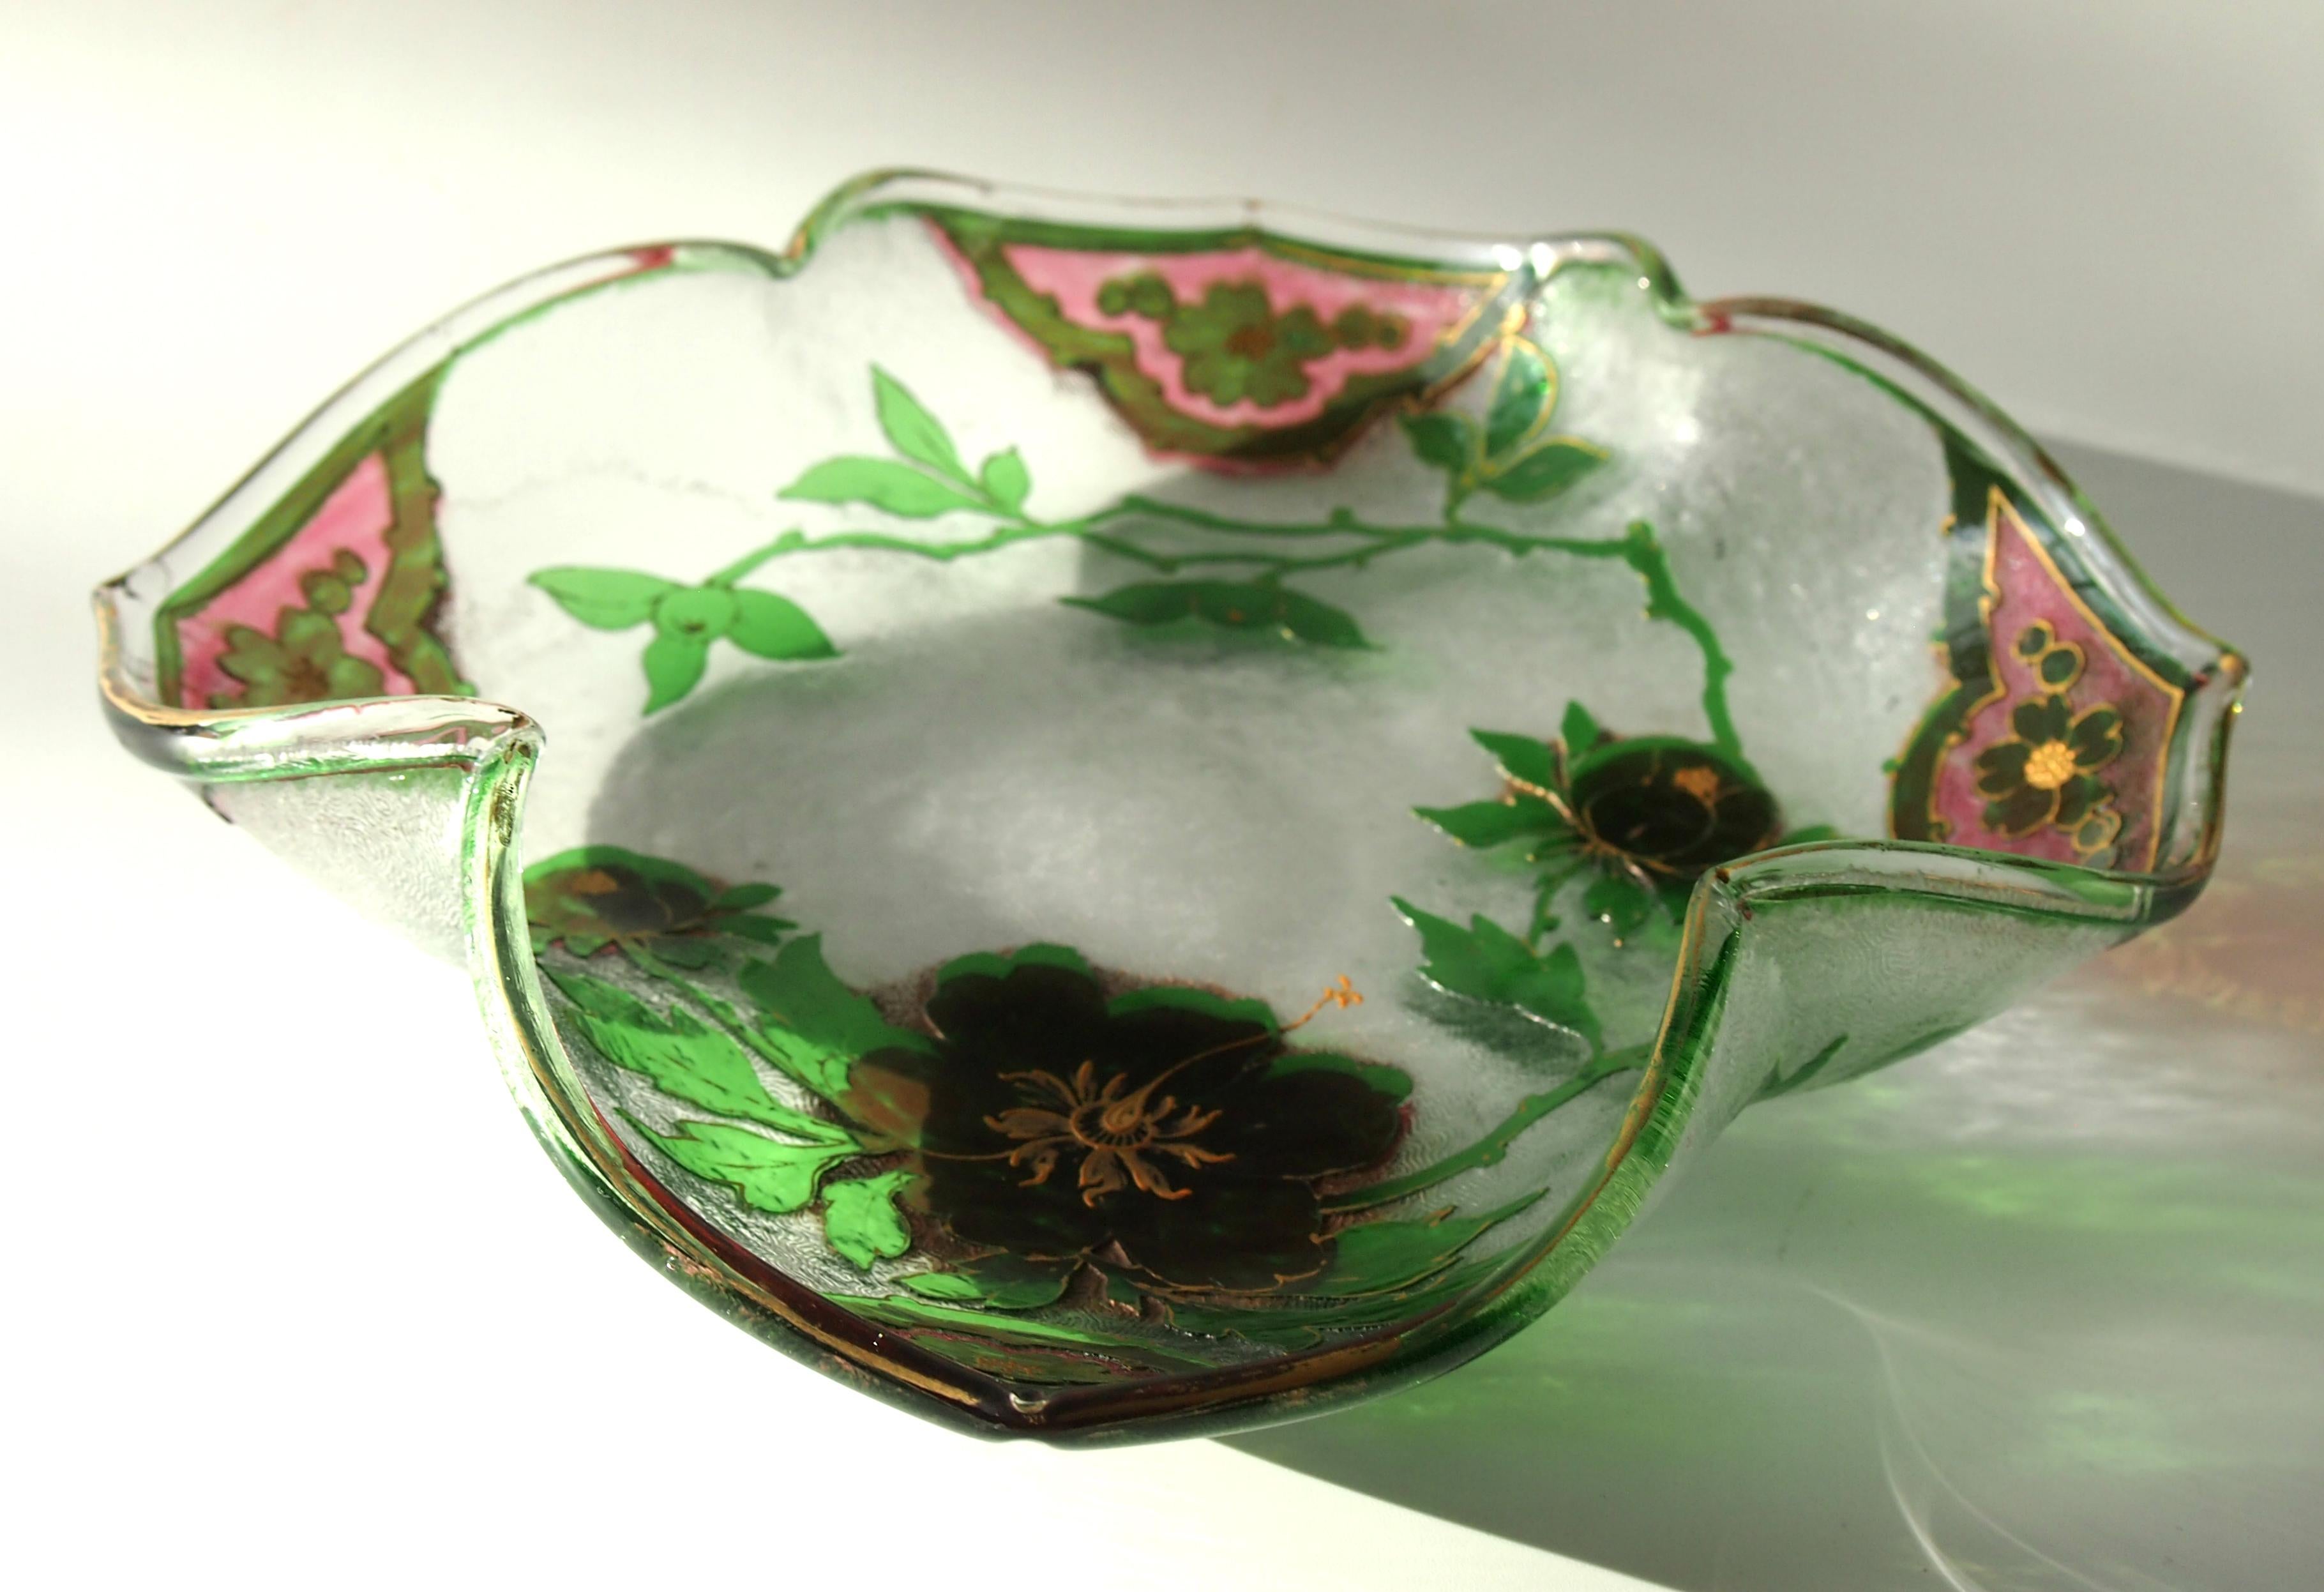 Bohemian Art Nouveau Pink and Green Cameo Glass Dish by Riedel, circa 1900 im Zustand „Gut“ im Angebot in London, GB